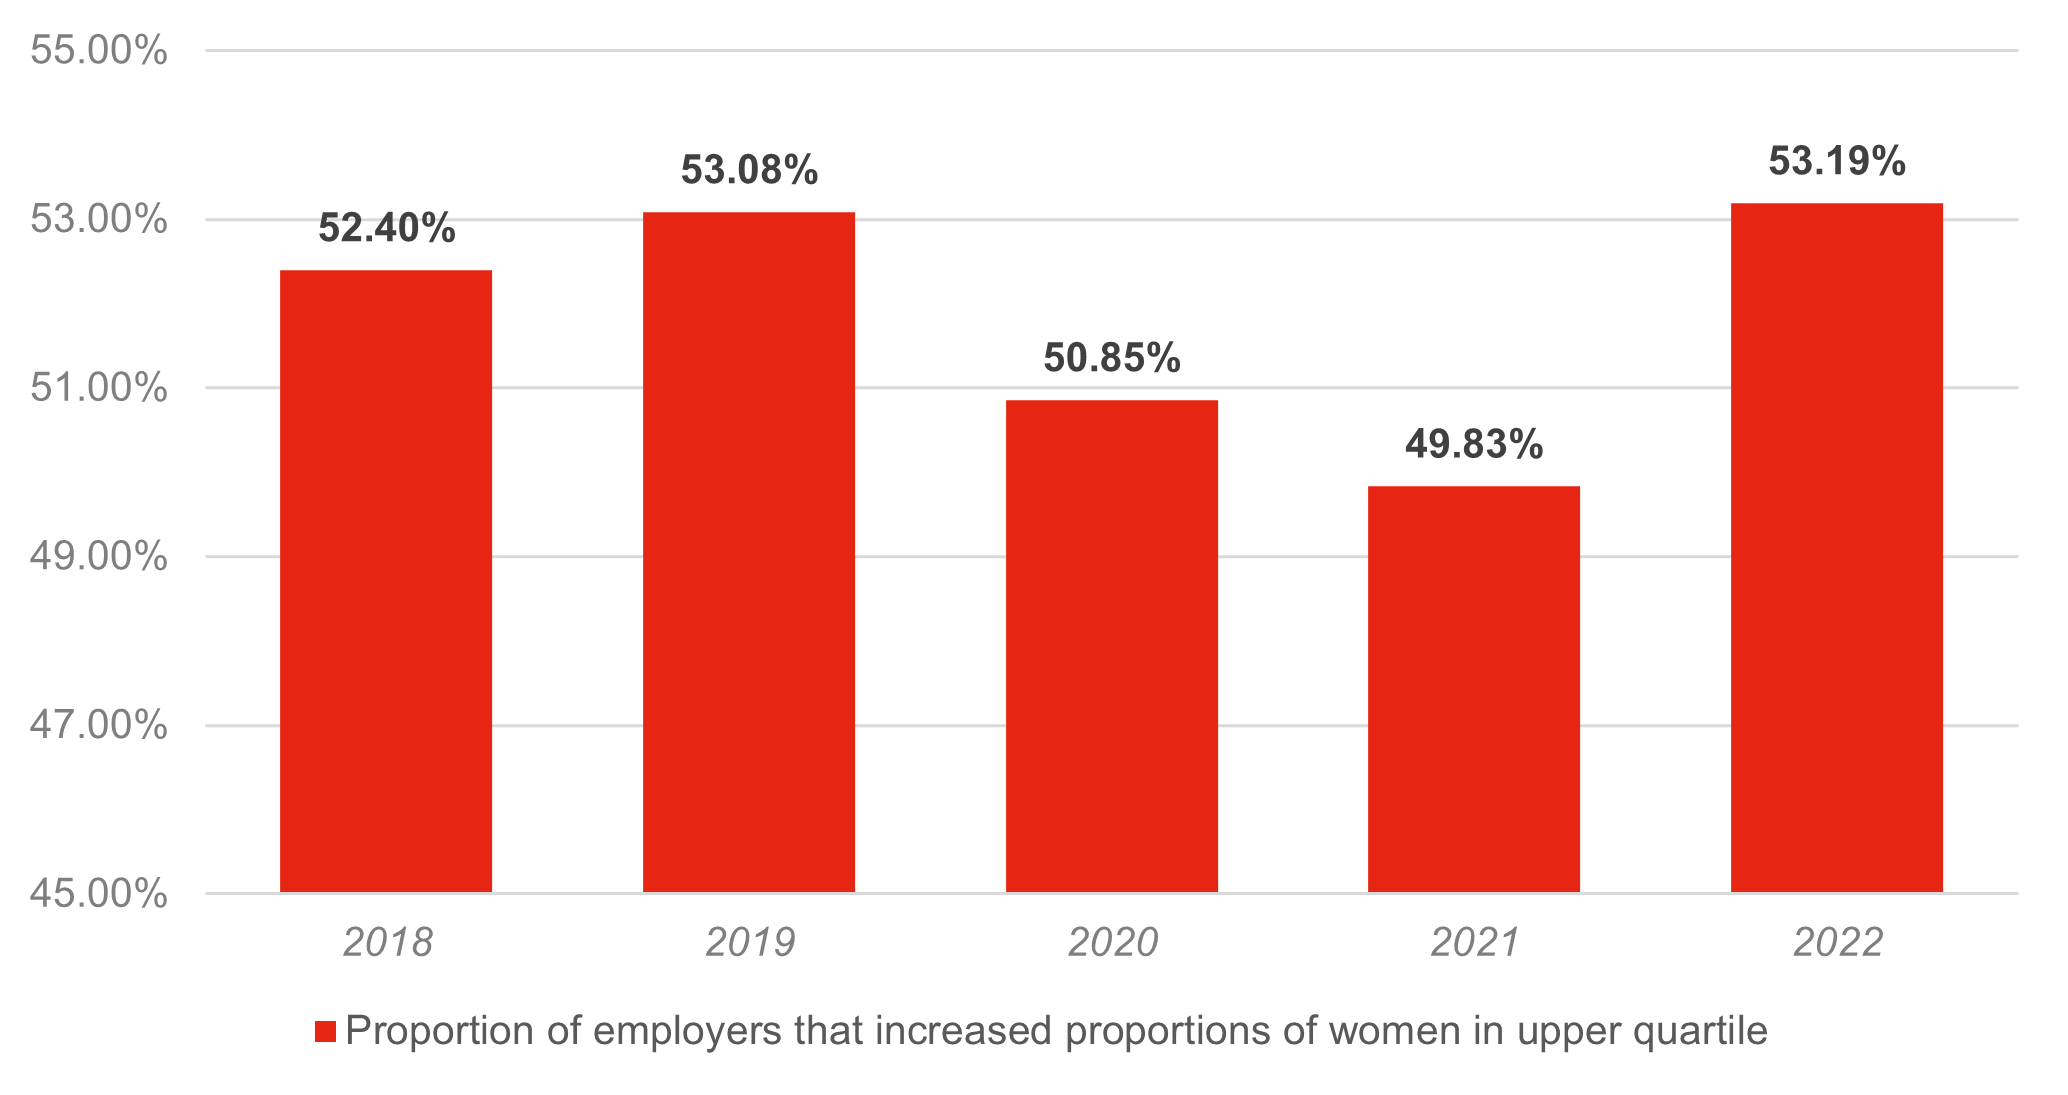 Proportion of employers that increased women in upper quartile